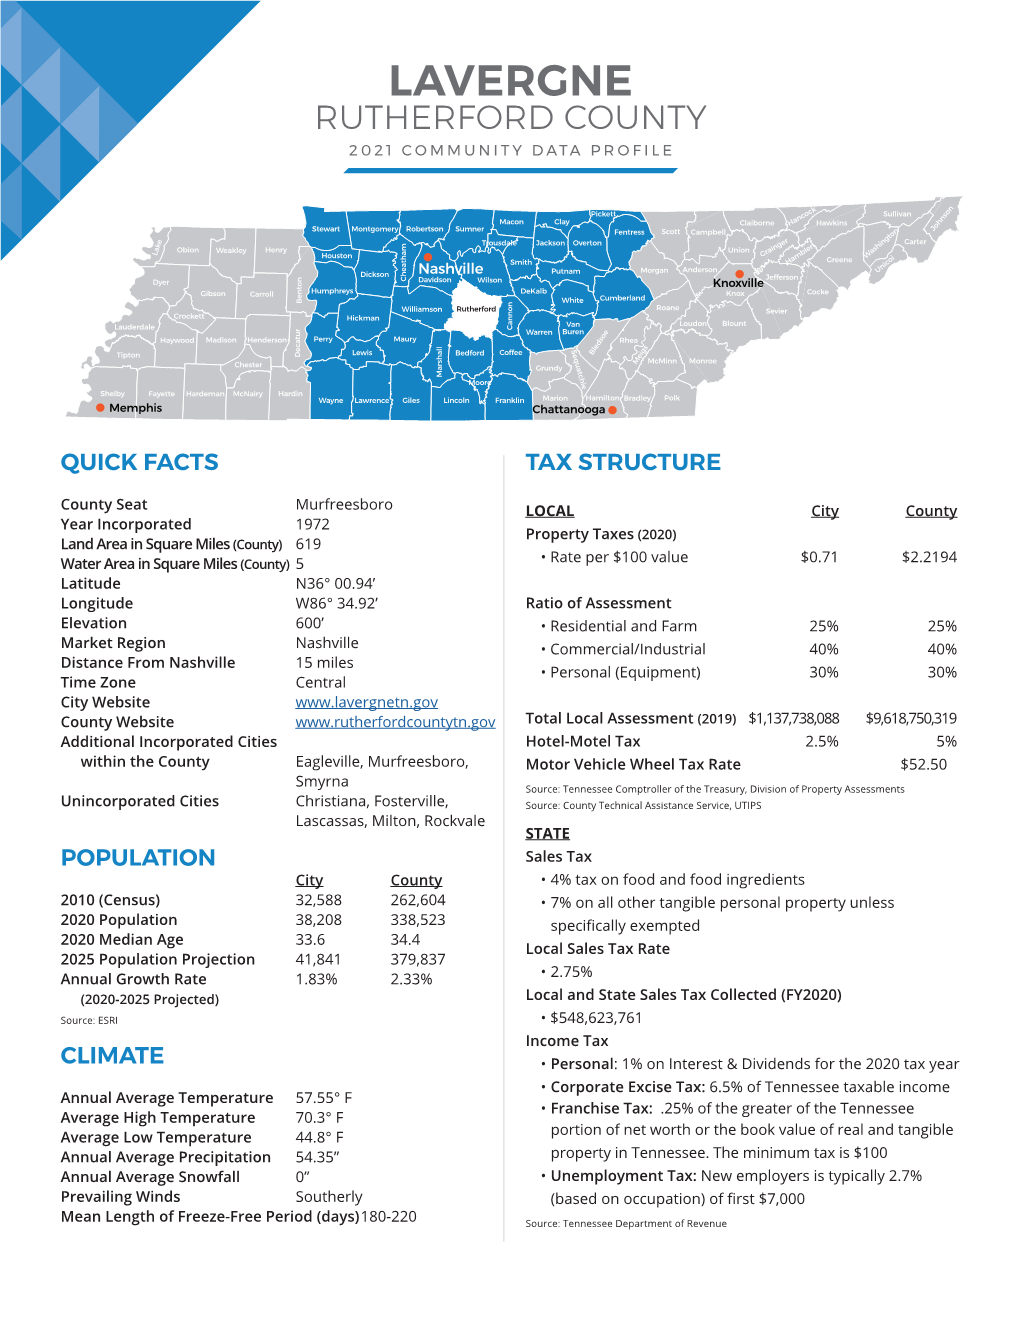 Lavergne Rutherford County 2021 Community Data Profile